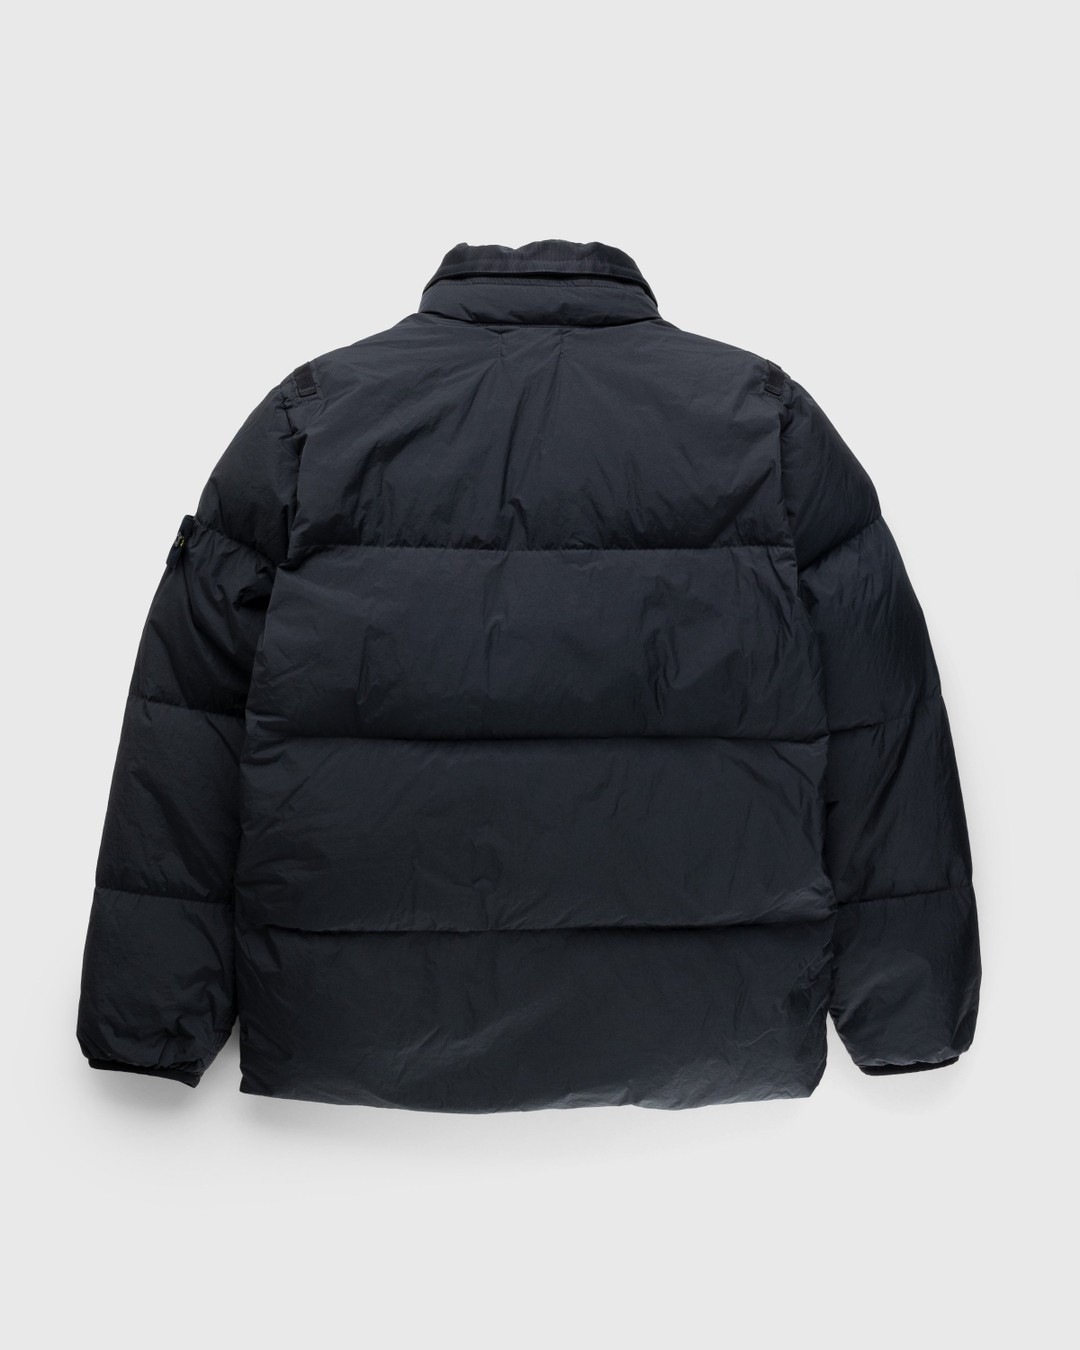 Stone Island – Garment-Dyed Crinkle Down Jacket Charcoal - Outerwear - Grey - Image 2